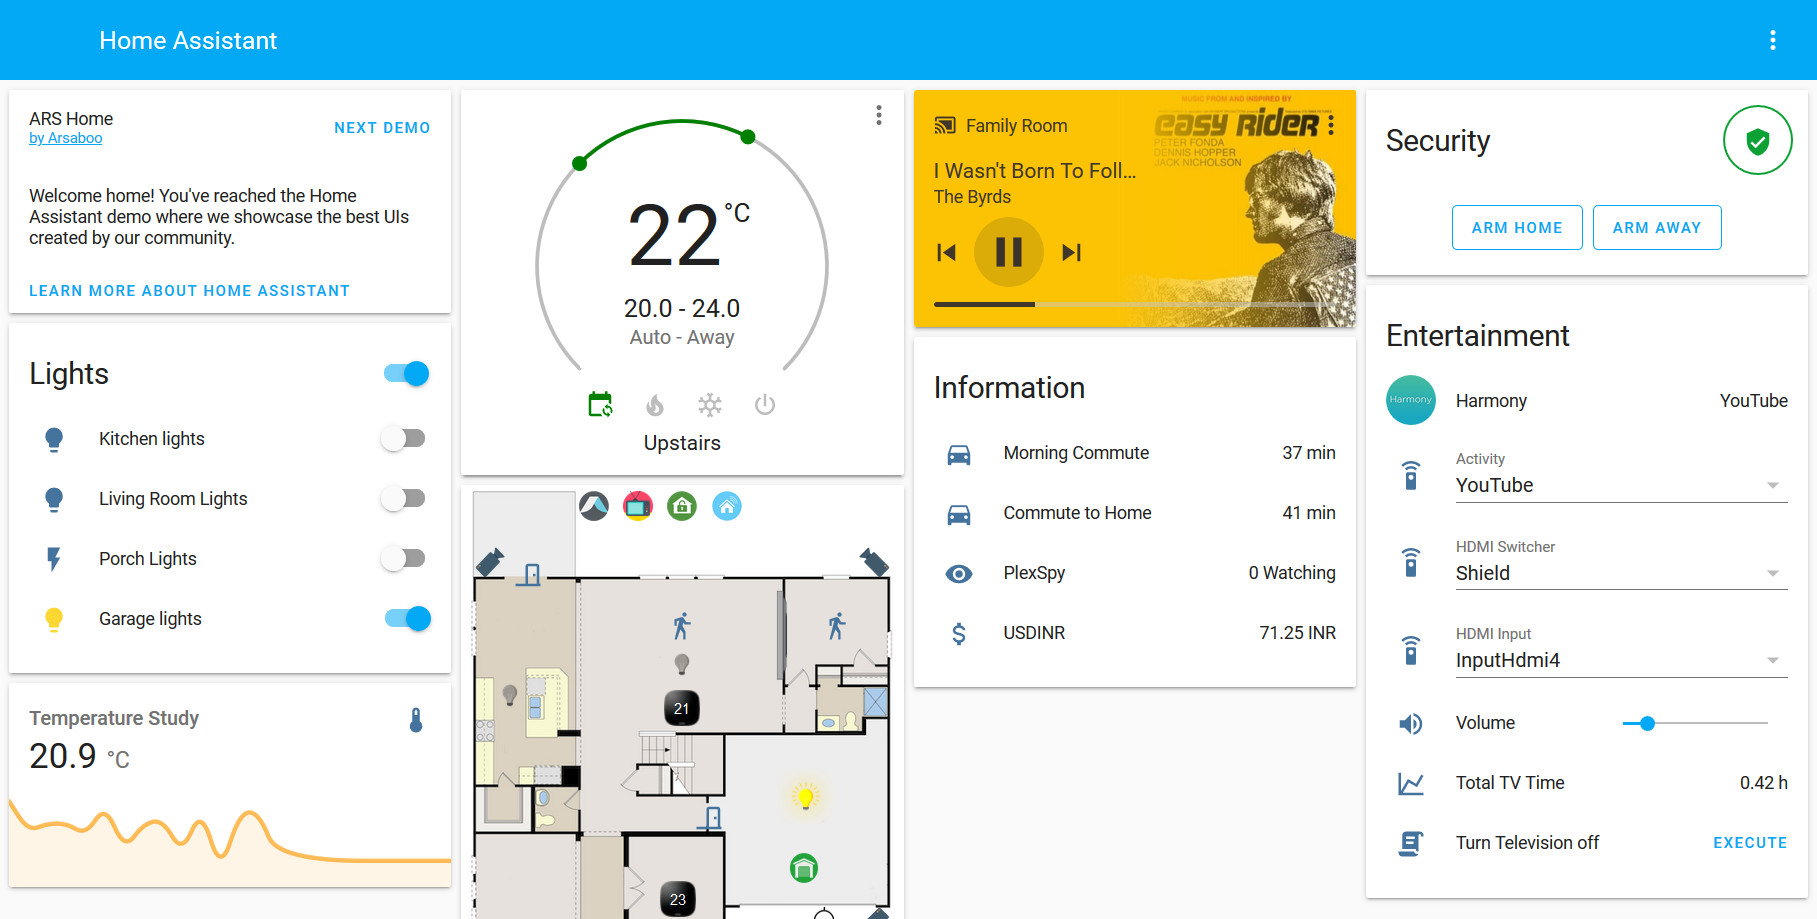 The Home Assistant dashboard